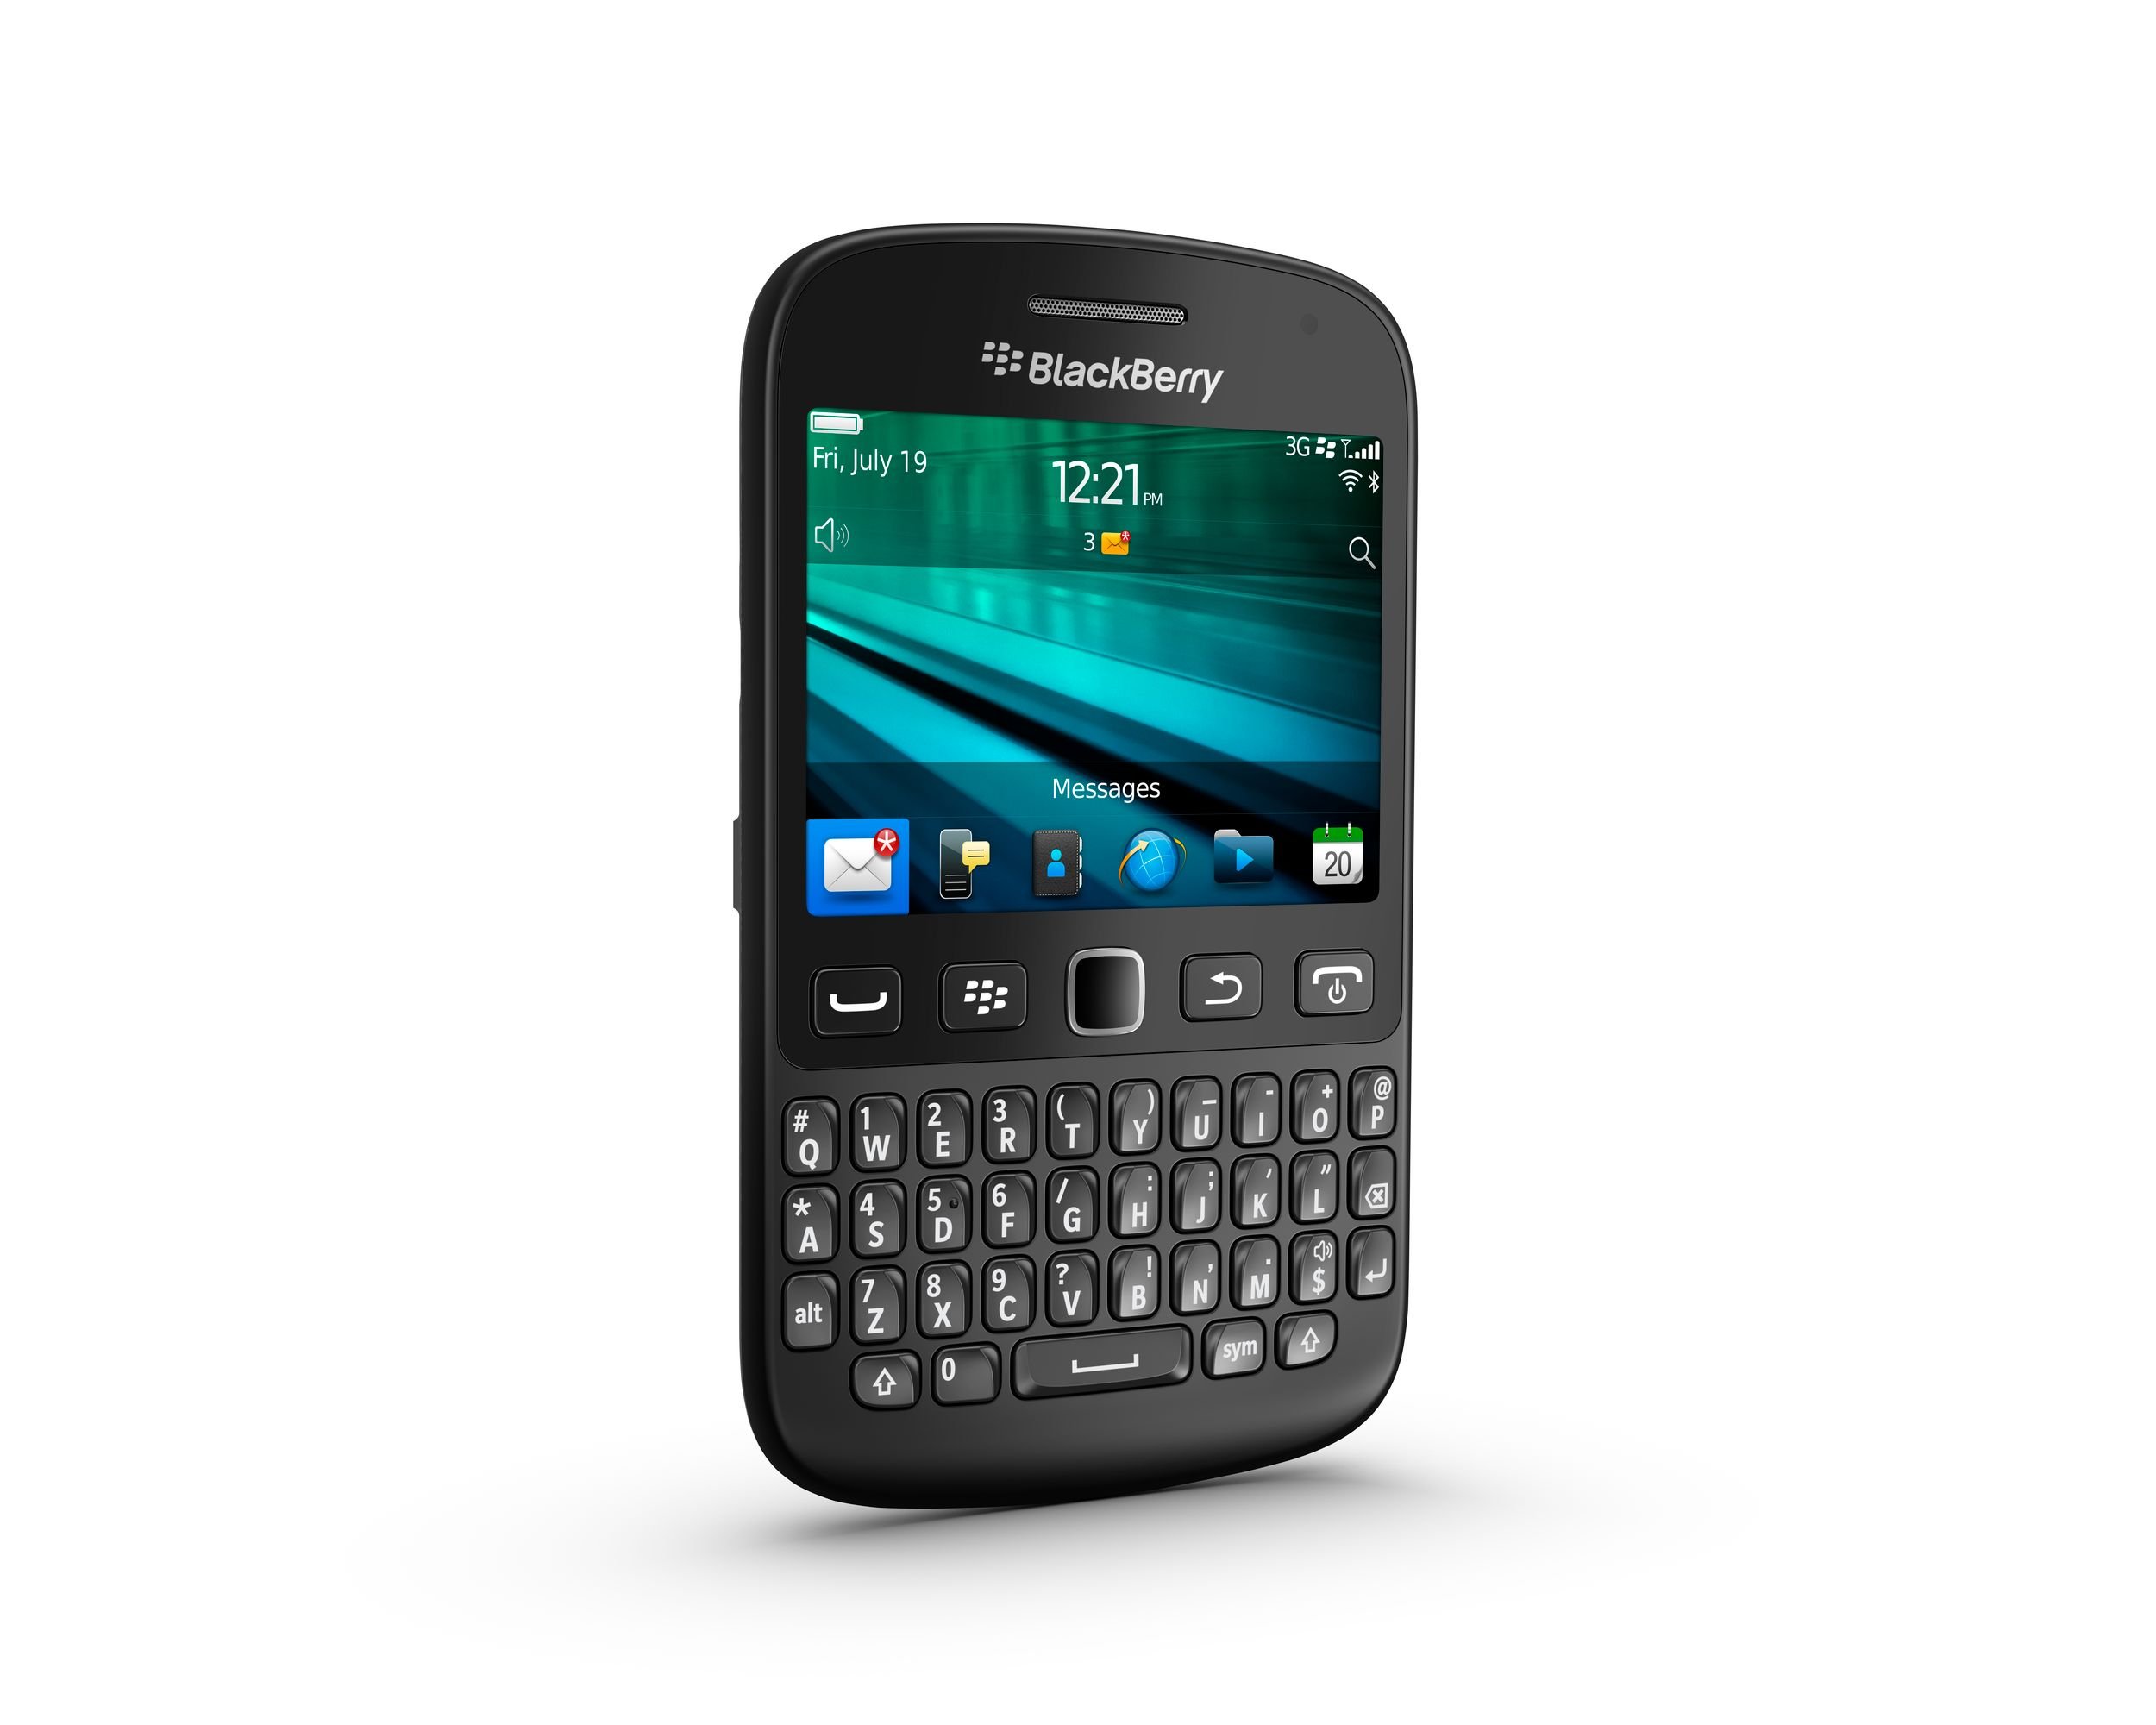 blackberry-9720-announced-but-it-runs-old-bb-7-1-os